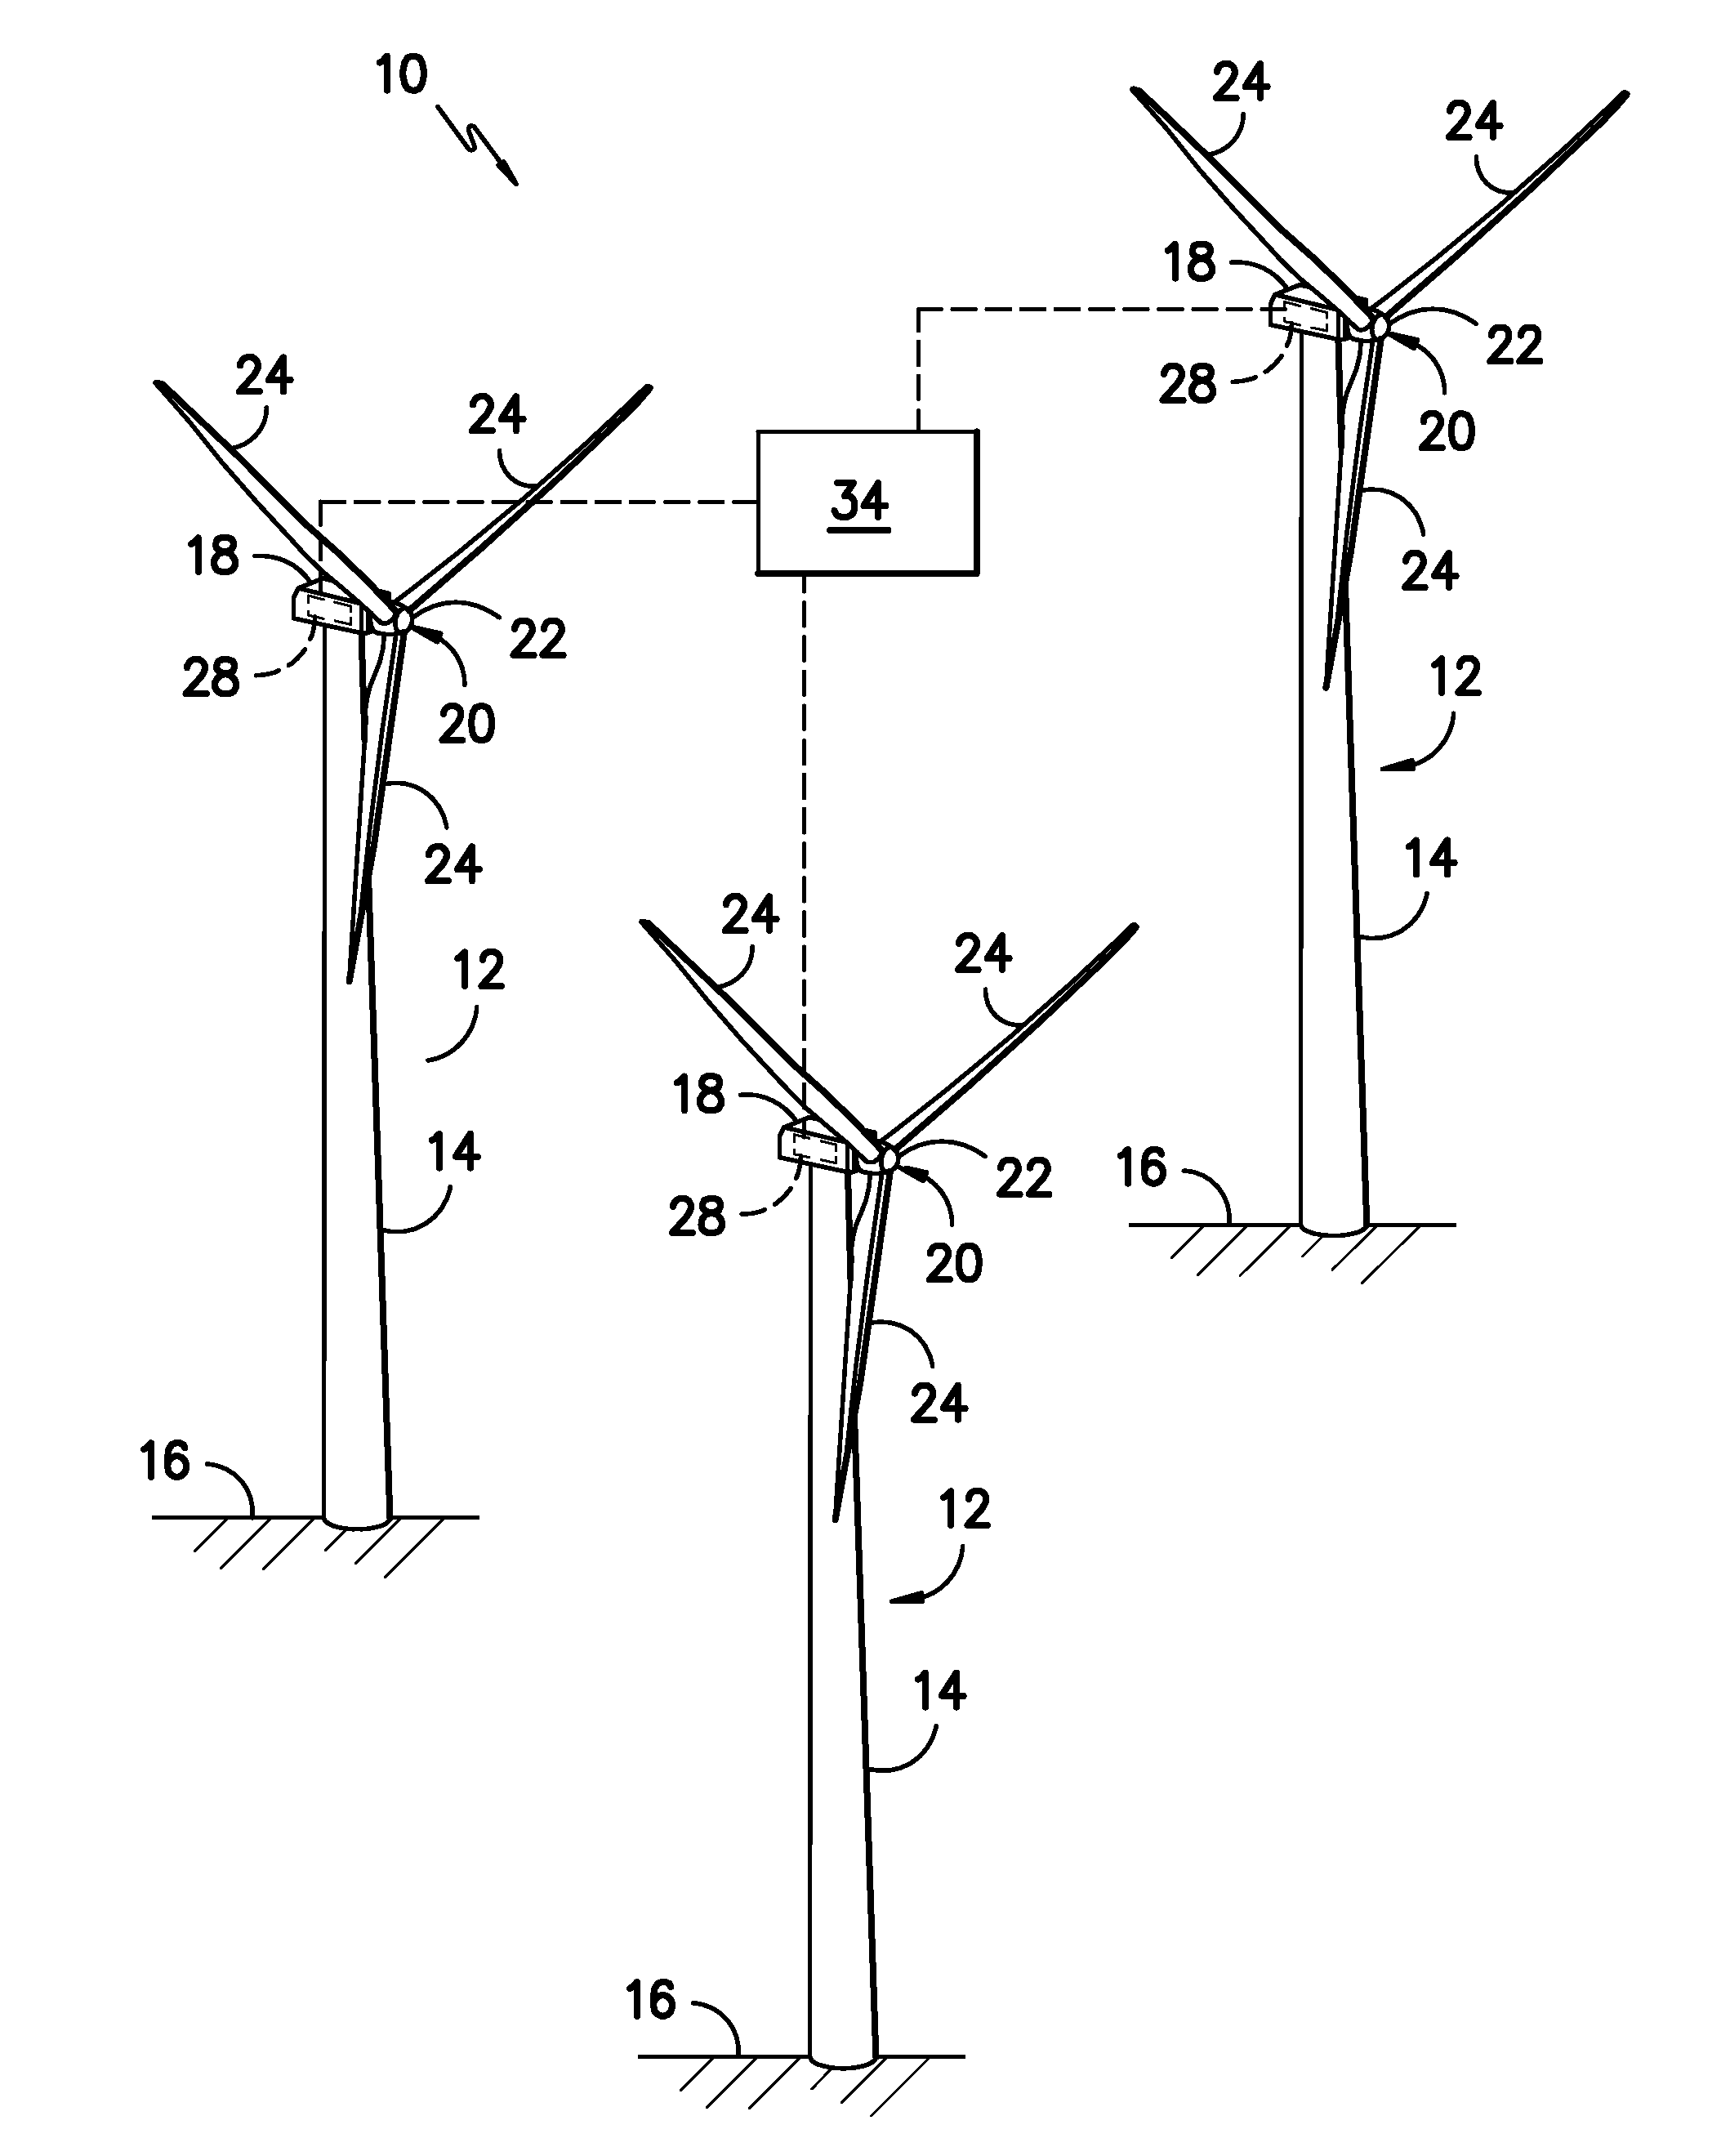 System and methods for controlling the amplitude modulation of noise generated by wind turbines